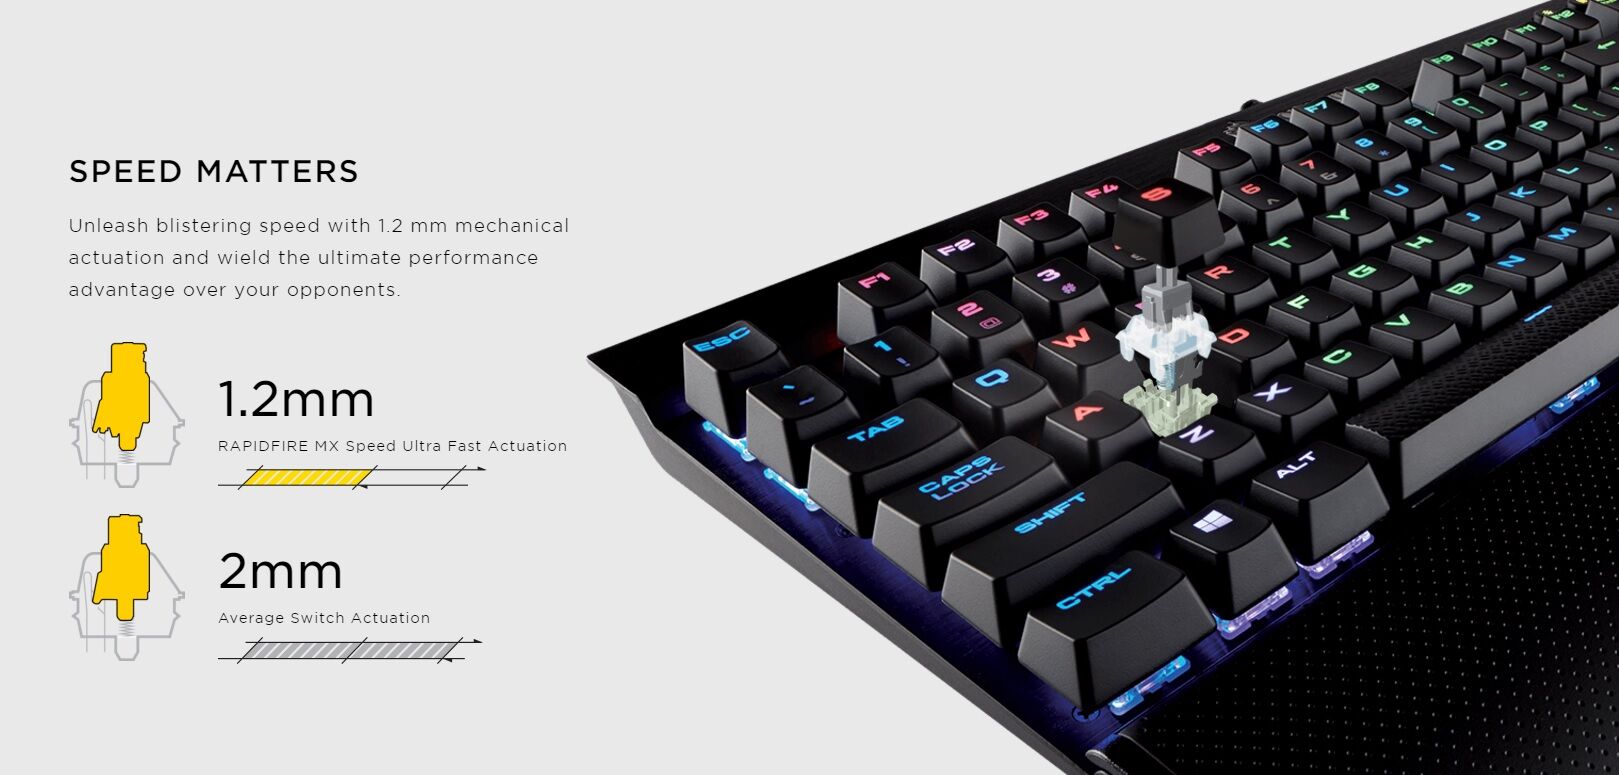 Corsair Rapidfire mechanical keyboards now official 25